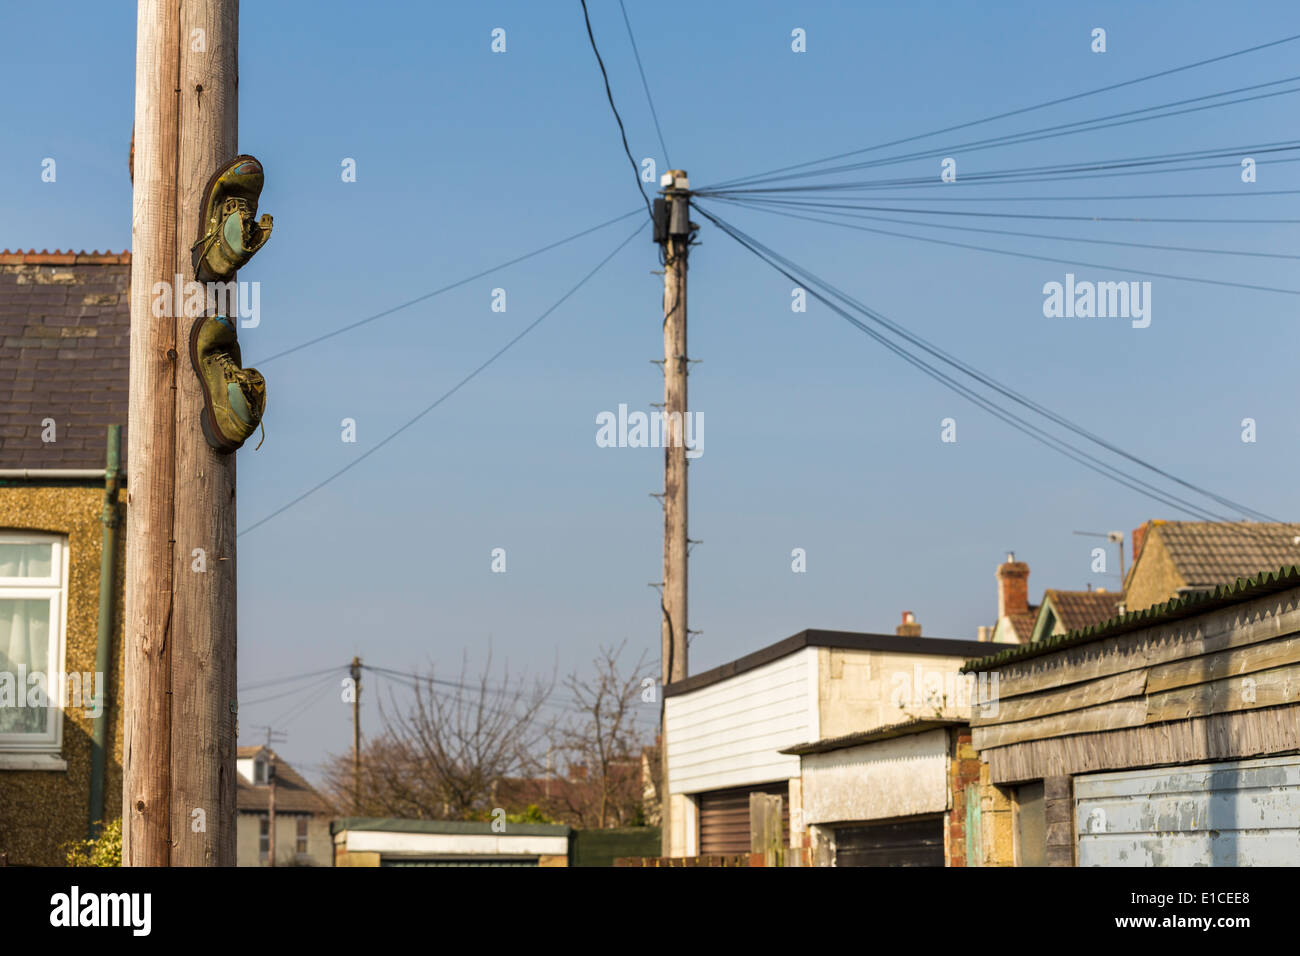 Boots on Lamppost depicting a meeting place for gangs and drug dealers Stock Photo